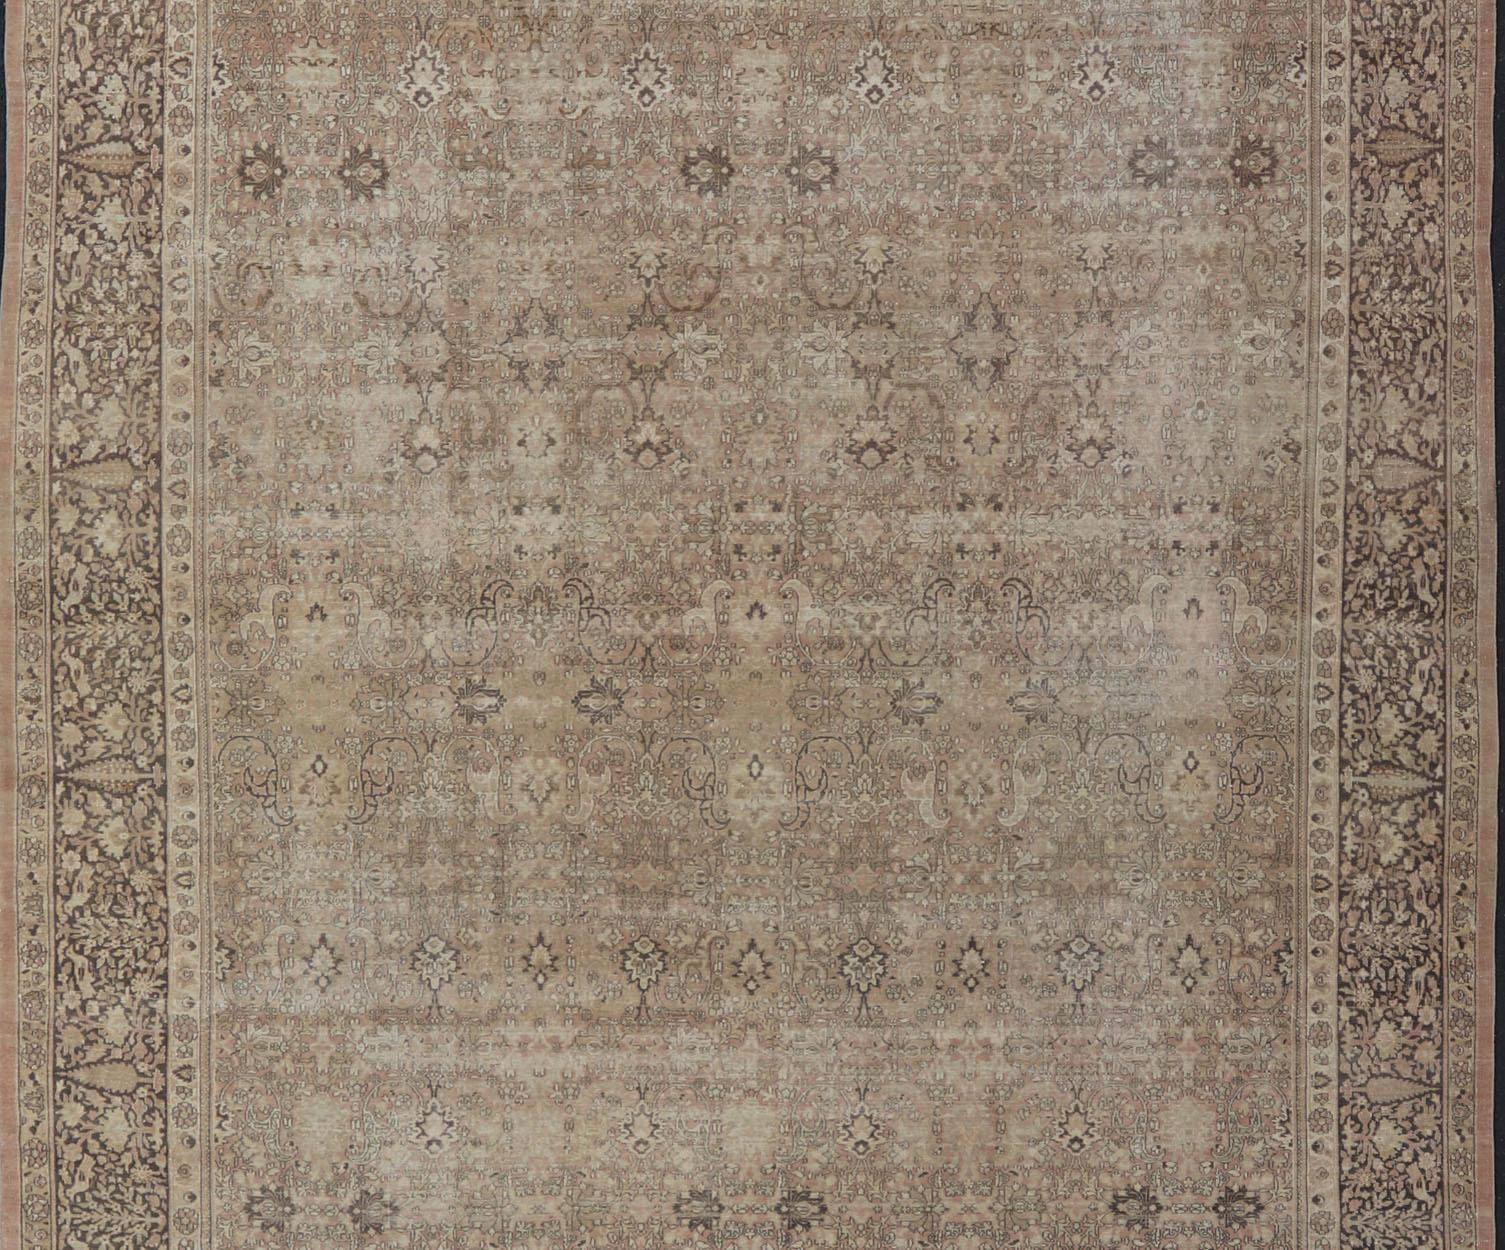 Large Antique Turkish Sivas Rug with Floral Design in Earthy Neutral Tones  For Sale 8